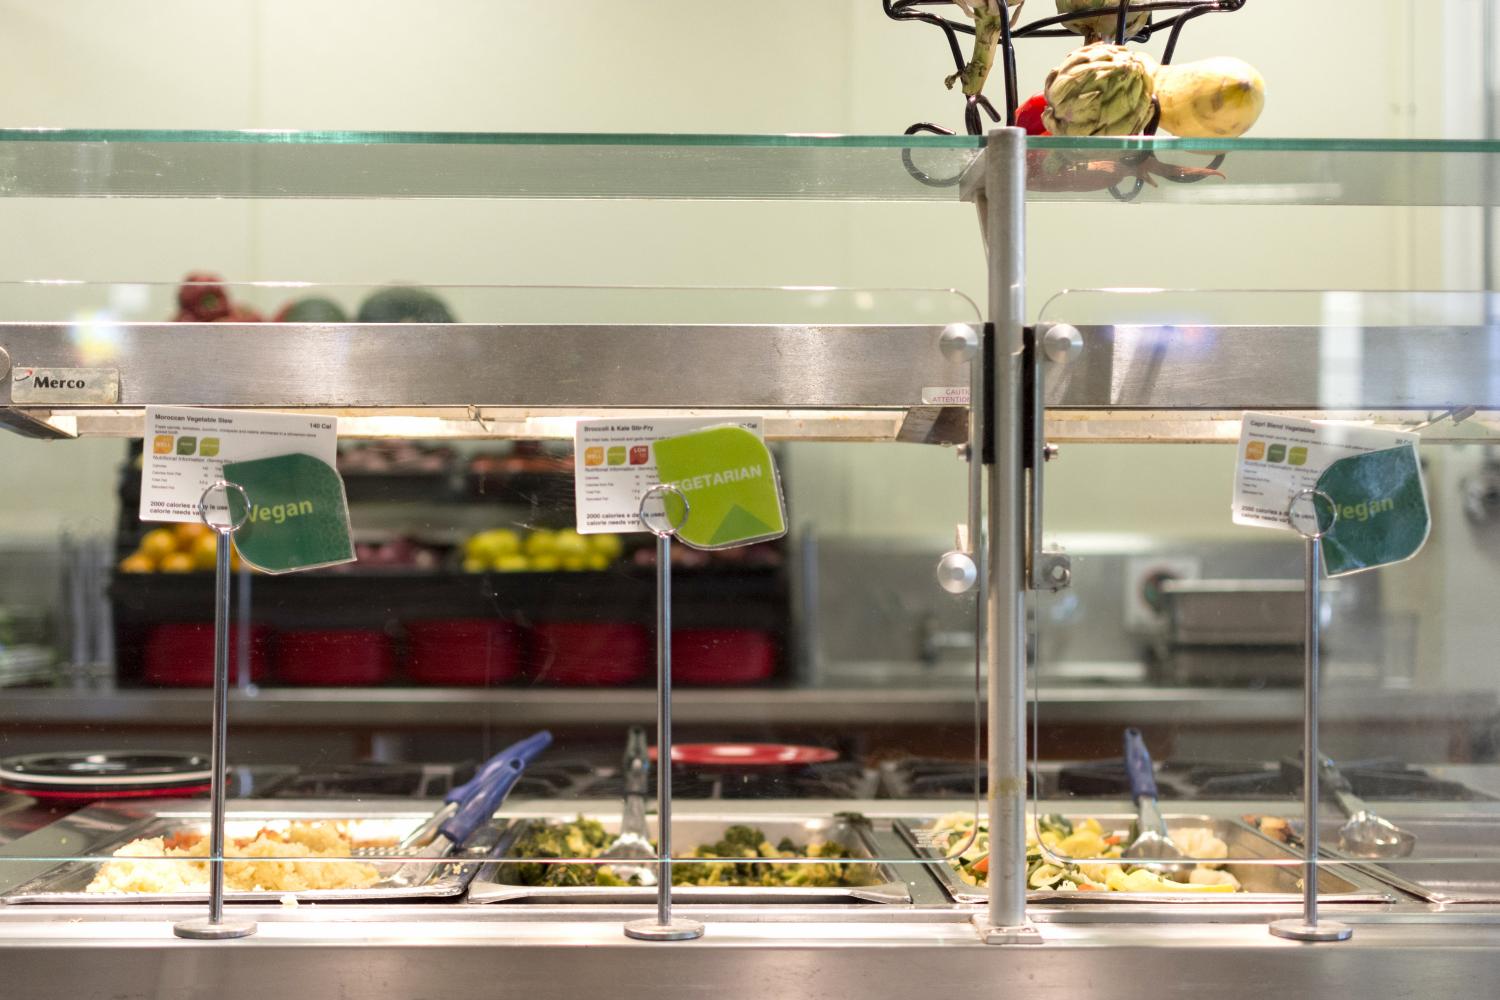 Aramark misses the mark with dining choices on campus